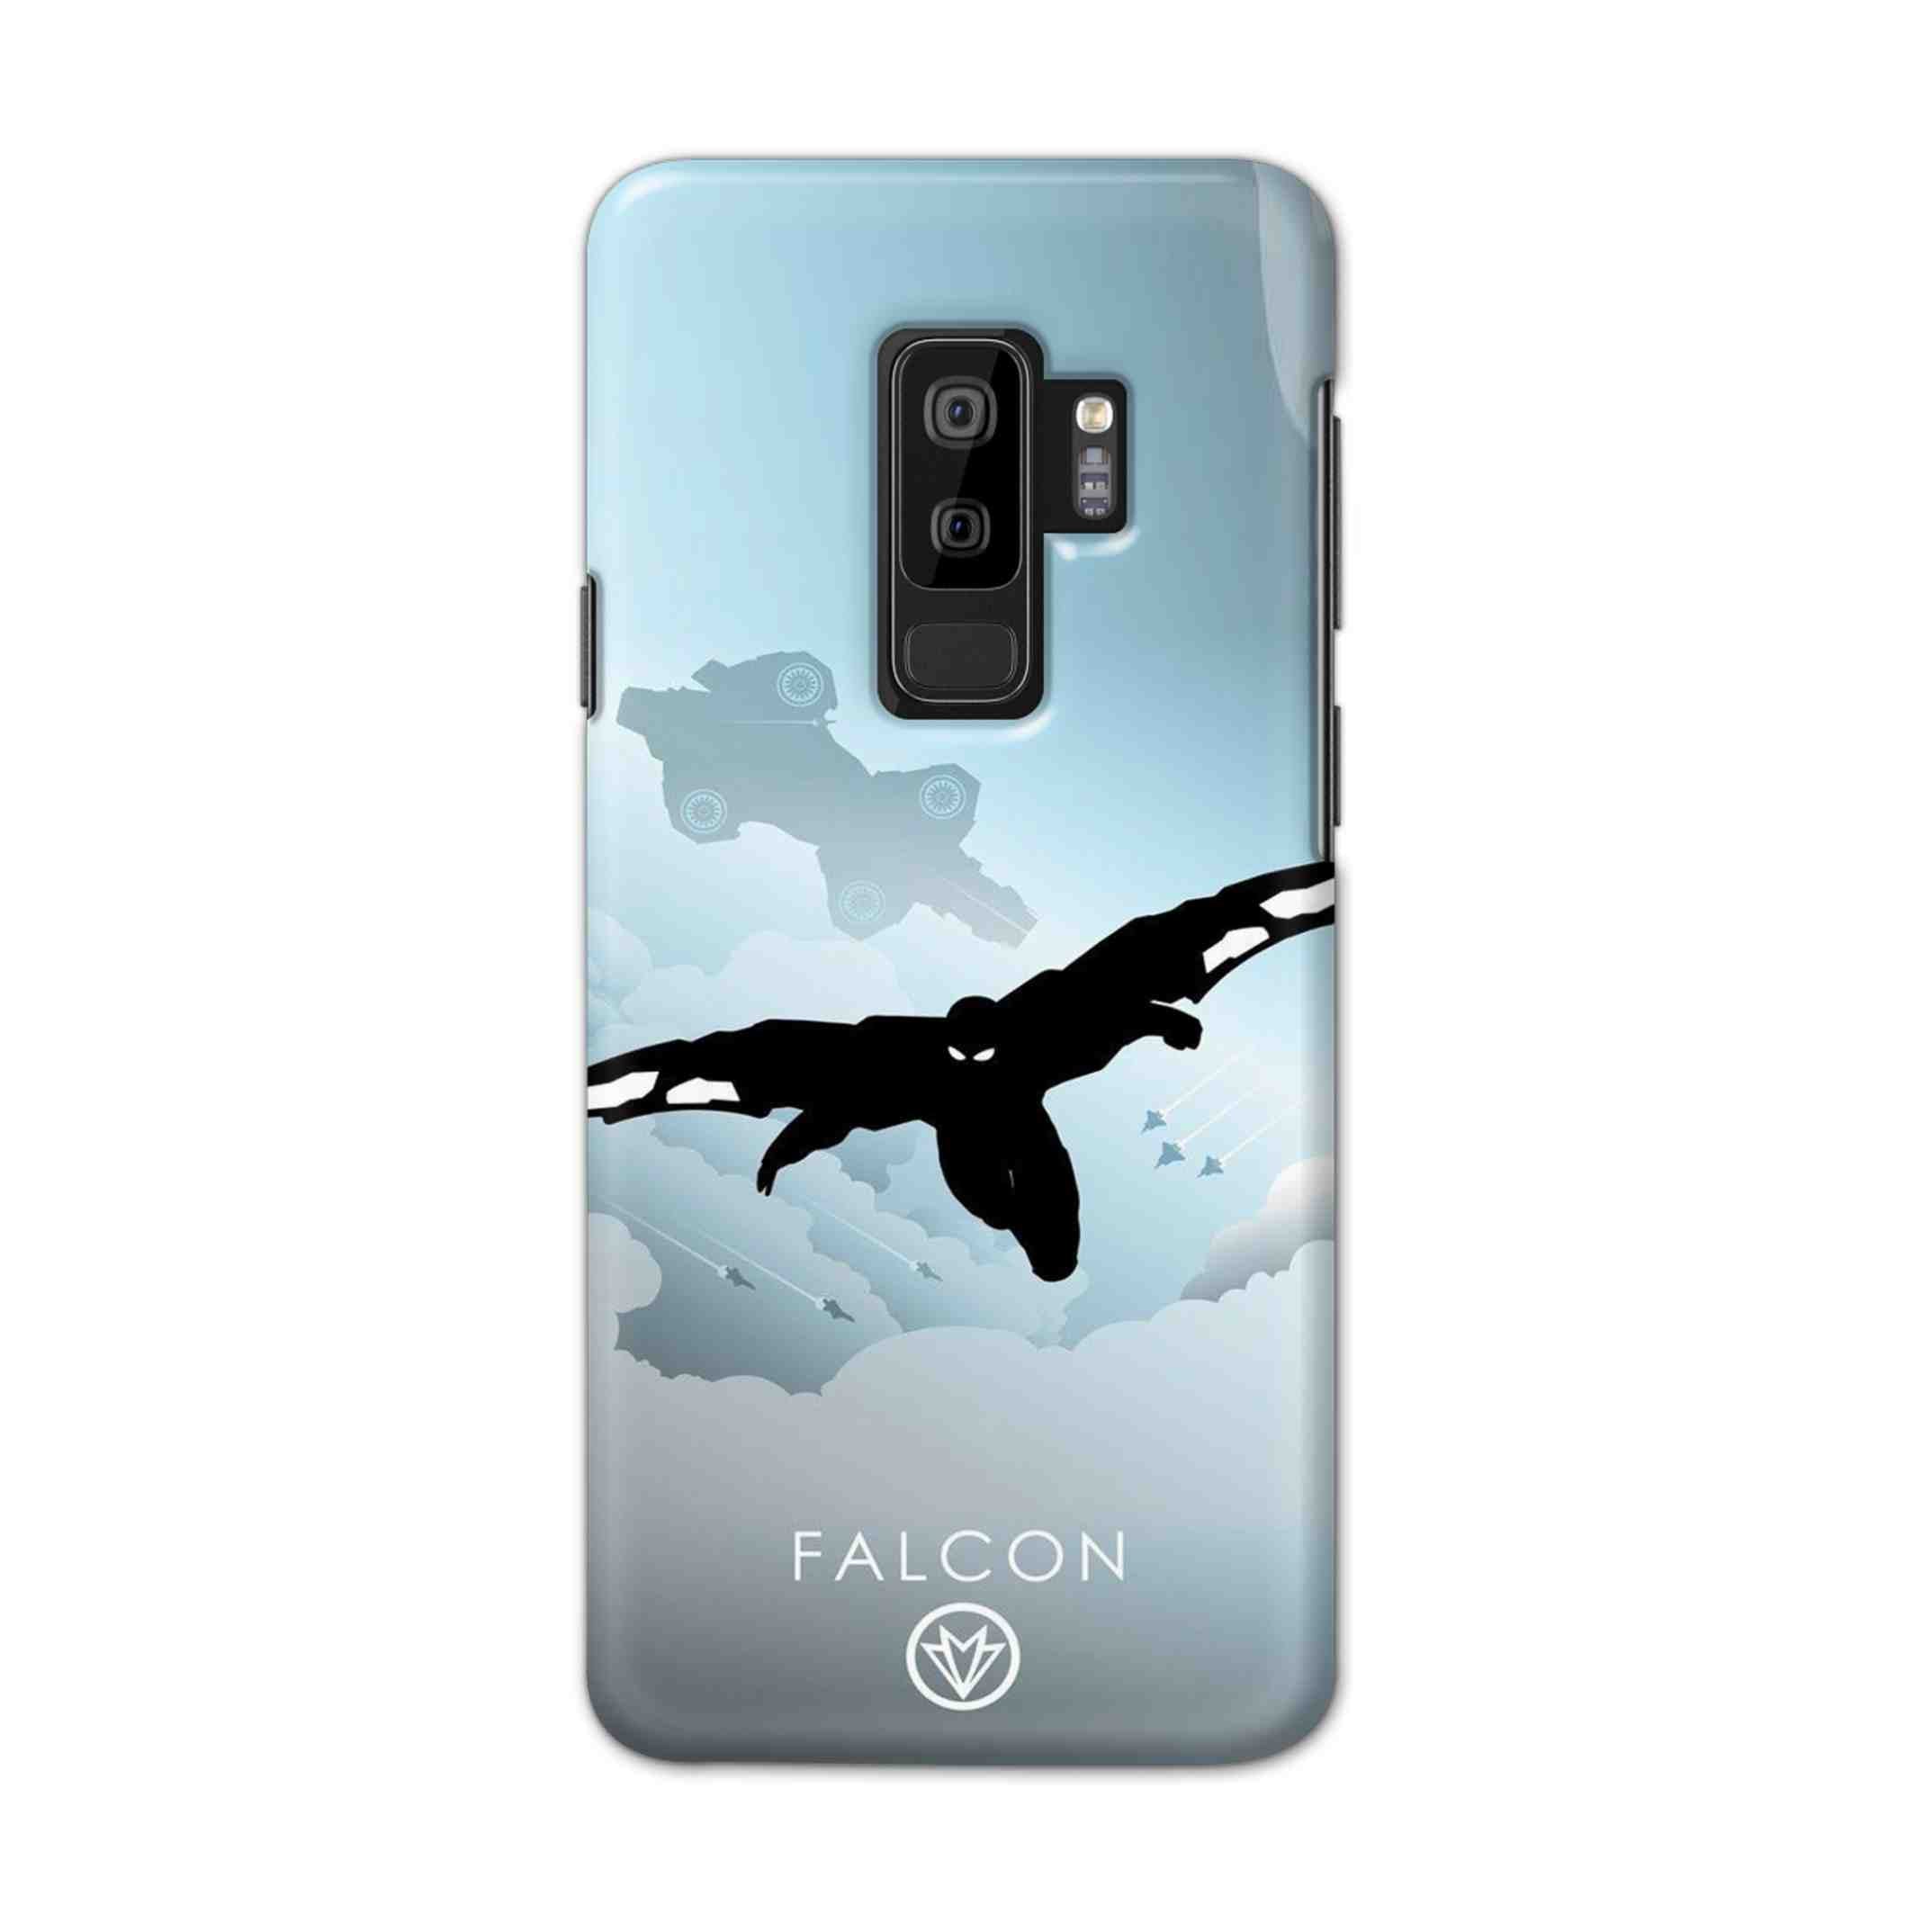 Buy Falcon Hard Back Mobile Phone Case Cover For Samsung S9 plus Online